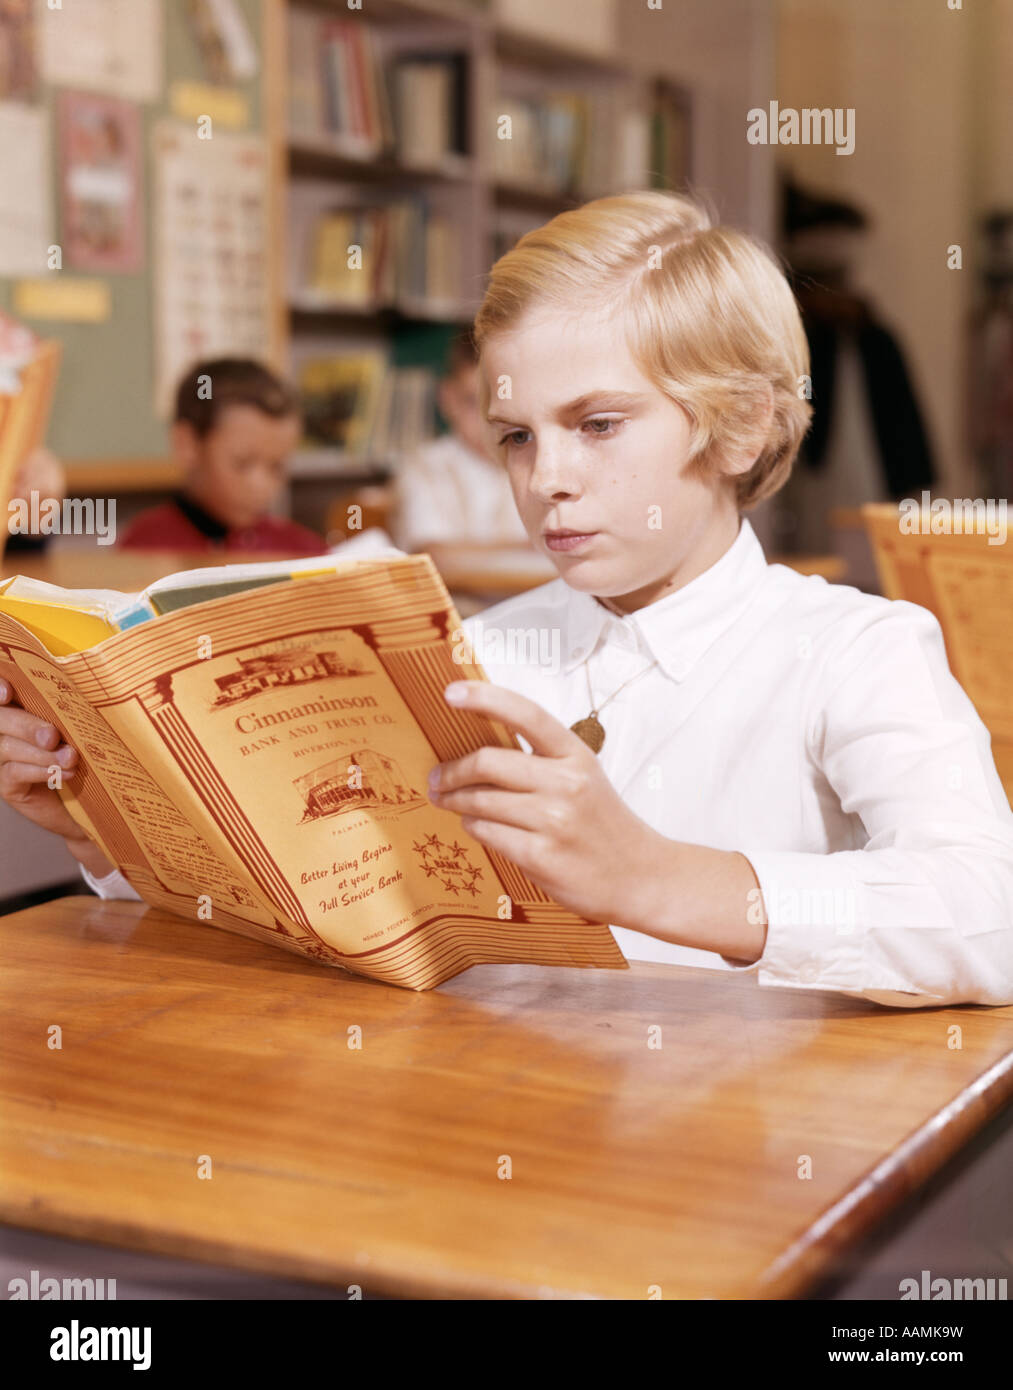 1960s BLONDE GIRL READING BOOK AT DESK IN CLASSROOM Stock Photo